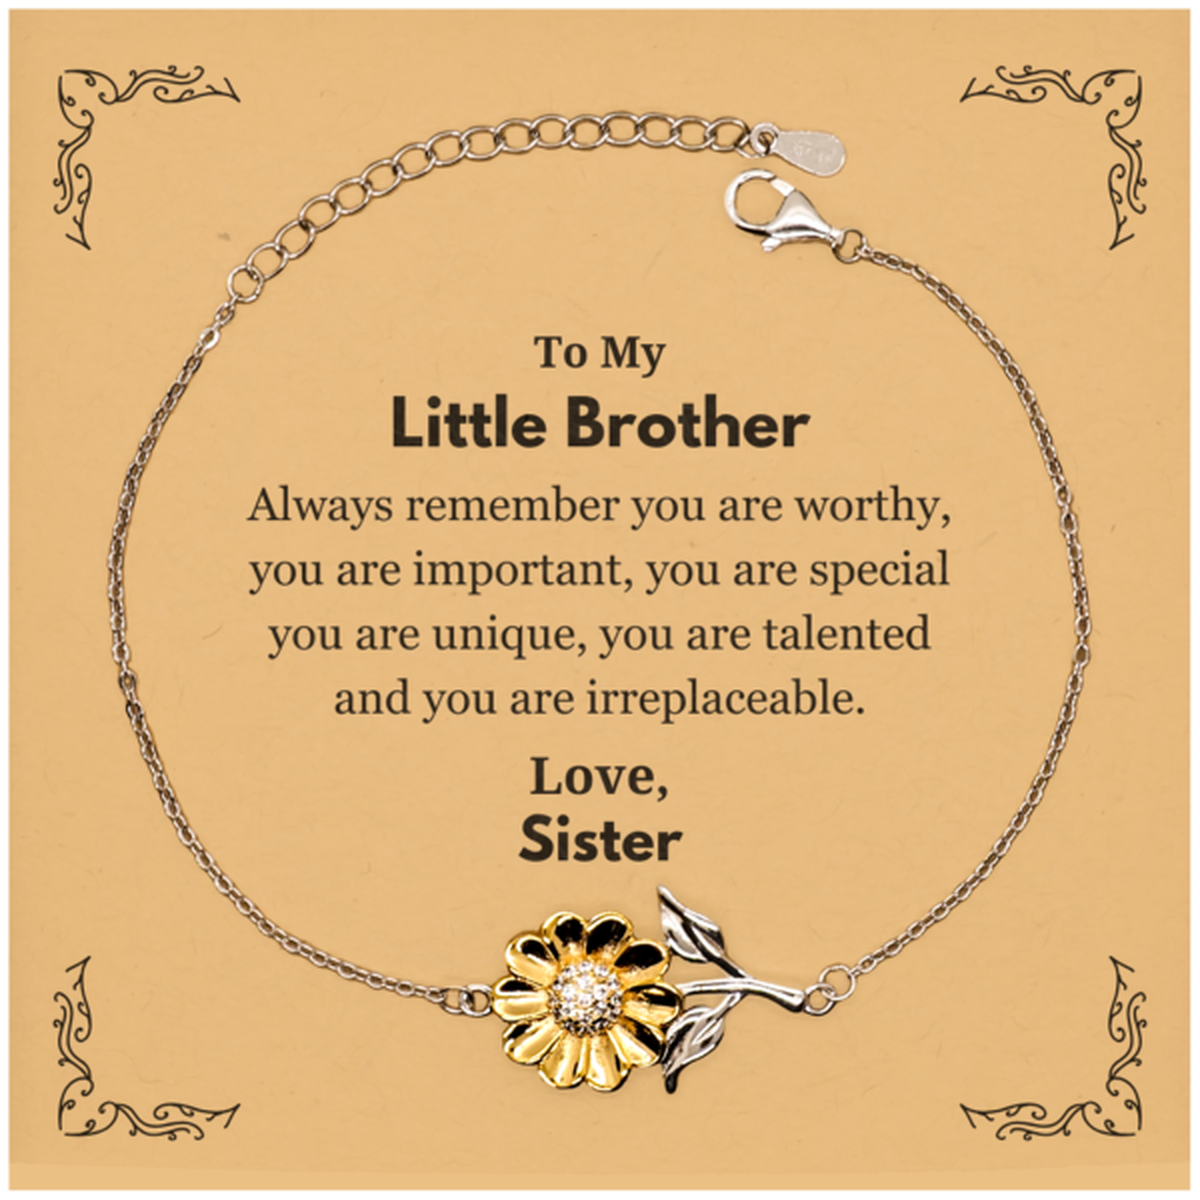 Little Brother Birthday Gifts from Sister, Inspirational Sunflower Bracelet for Little Brother Christmas Graduation Gifts for Little Brother Always remember you are worthy, you are important. Love, Sister